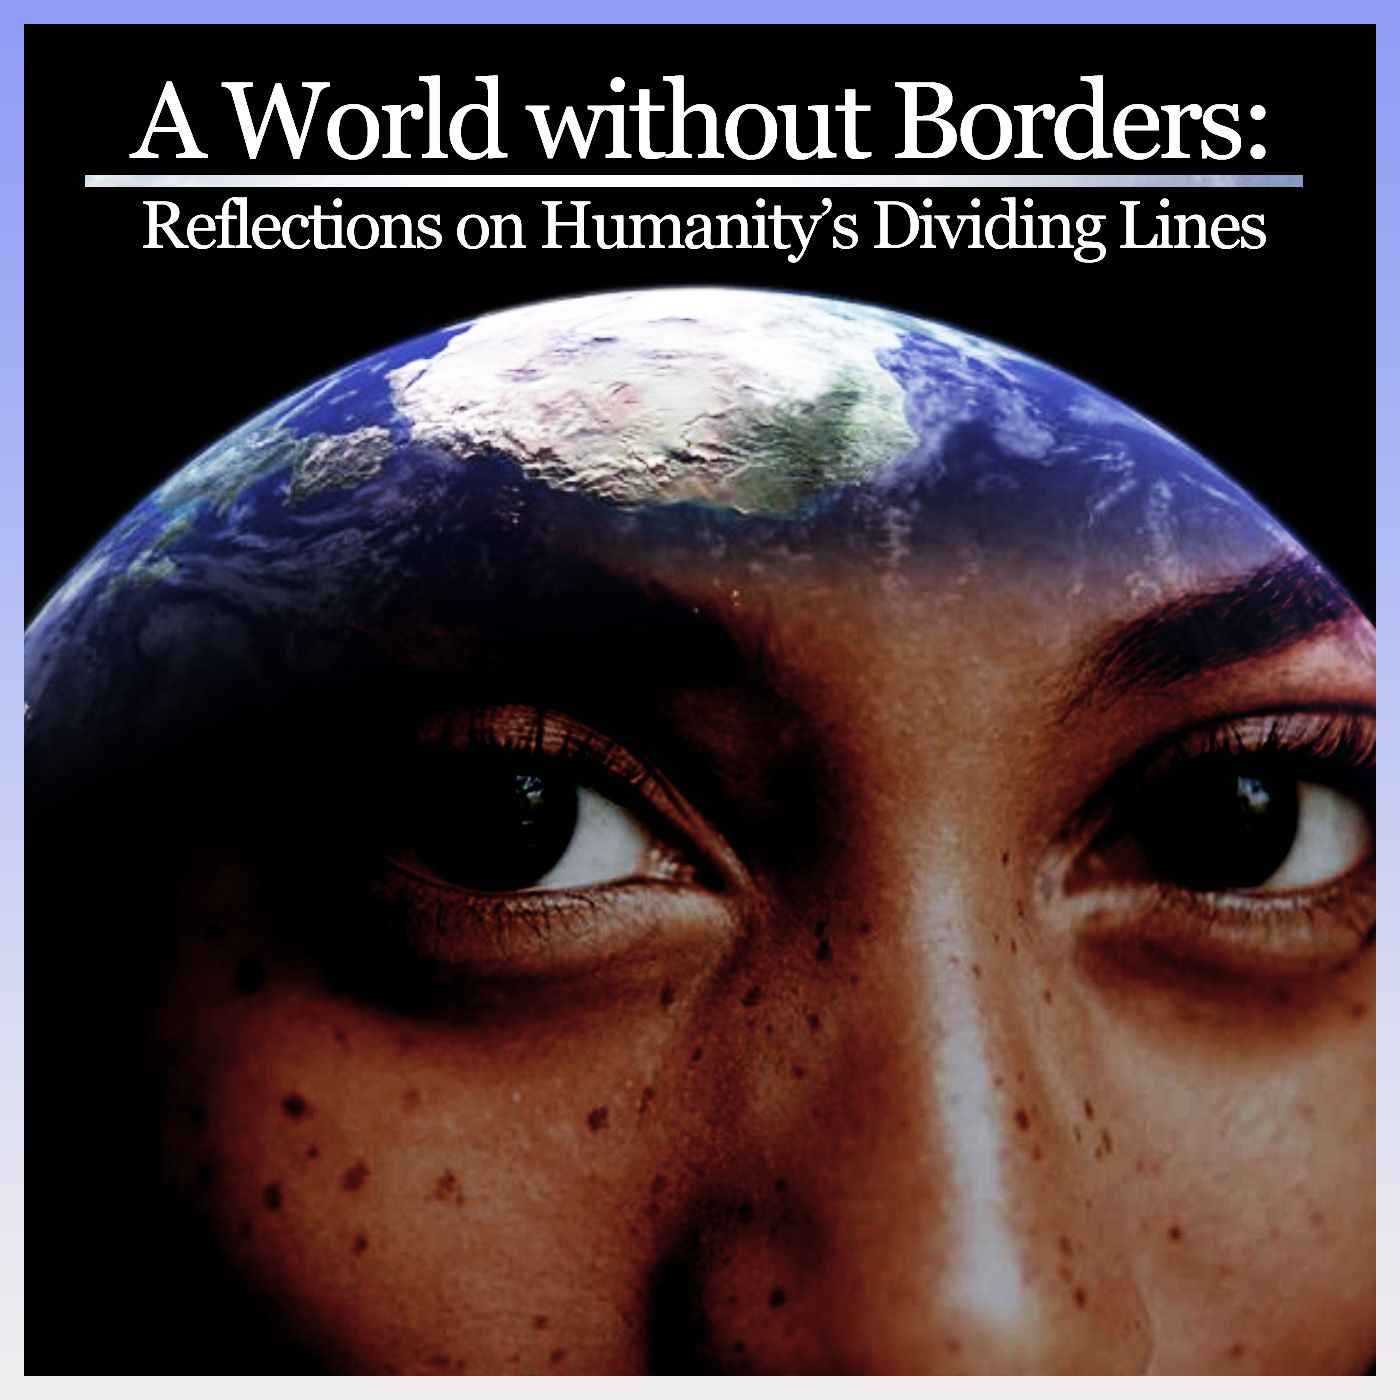 A World without Borders: Reflections on Humanity’s Dividing Lines